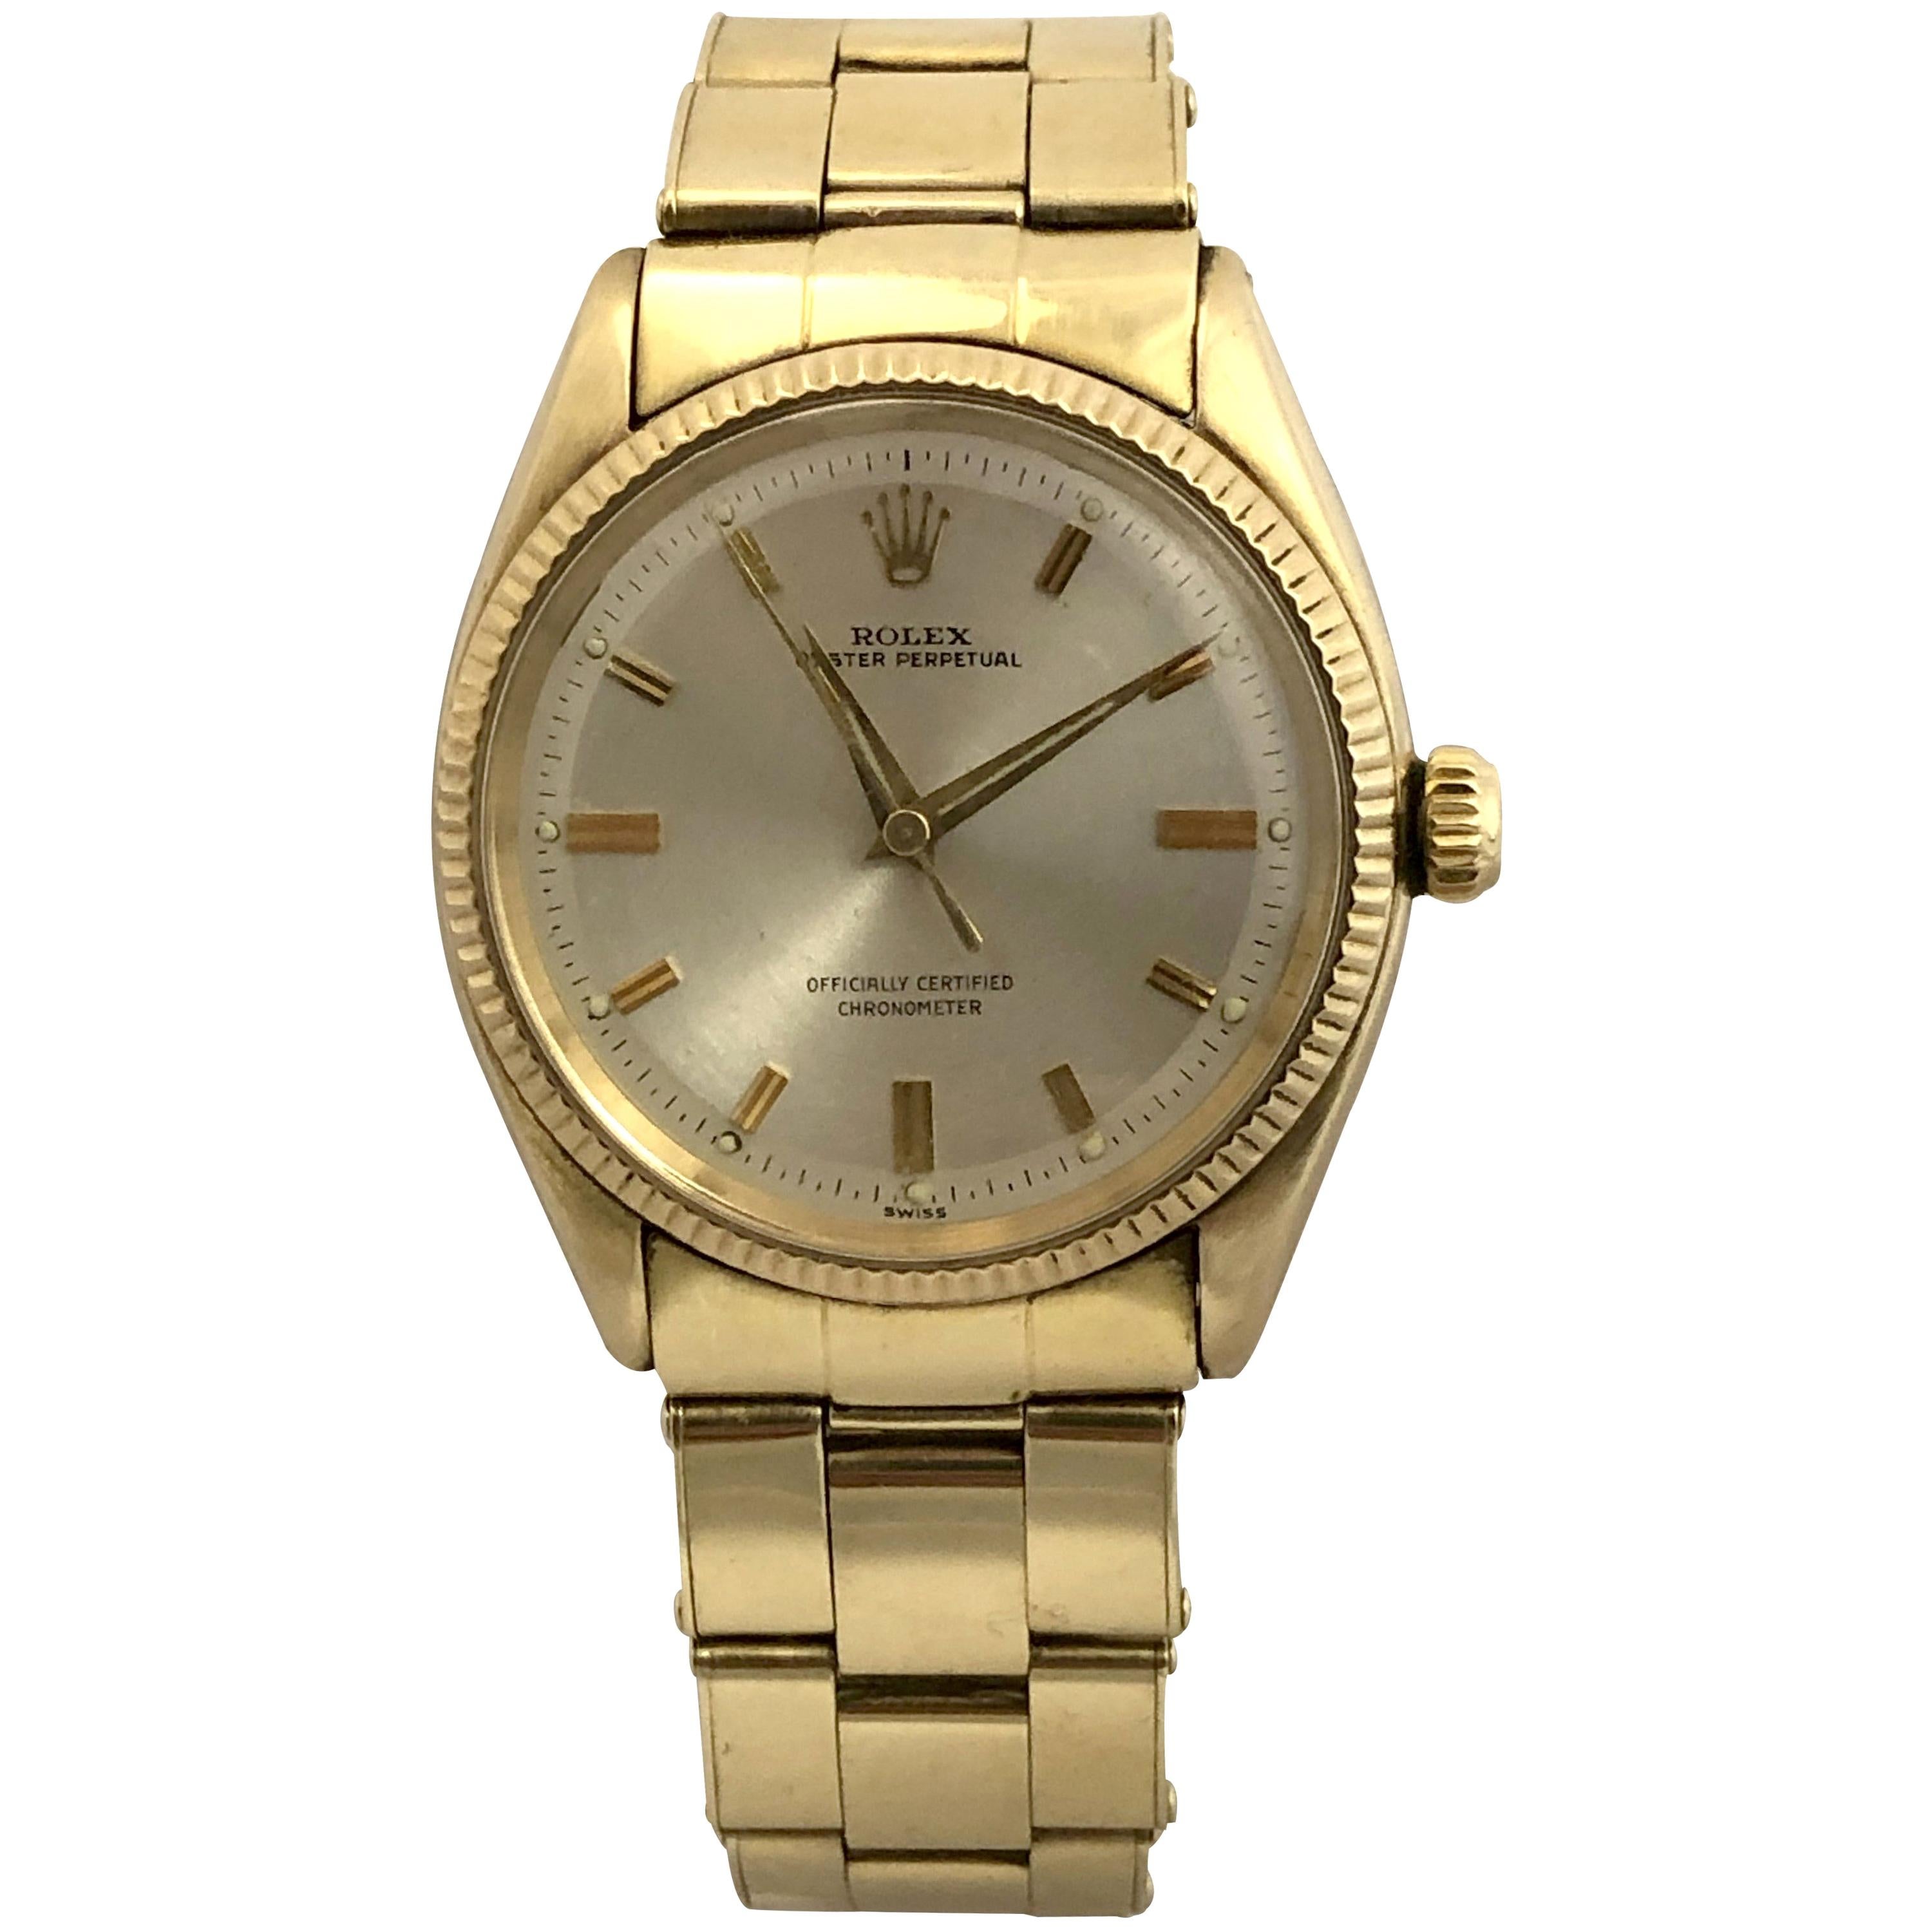 Rolex 1950s Ref 6567 Oyster Perpetual Gold Automatic Wristwatch on Bracelet